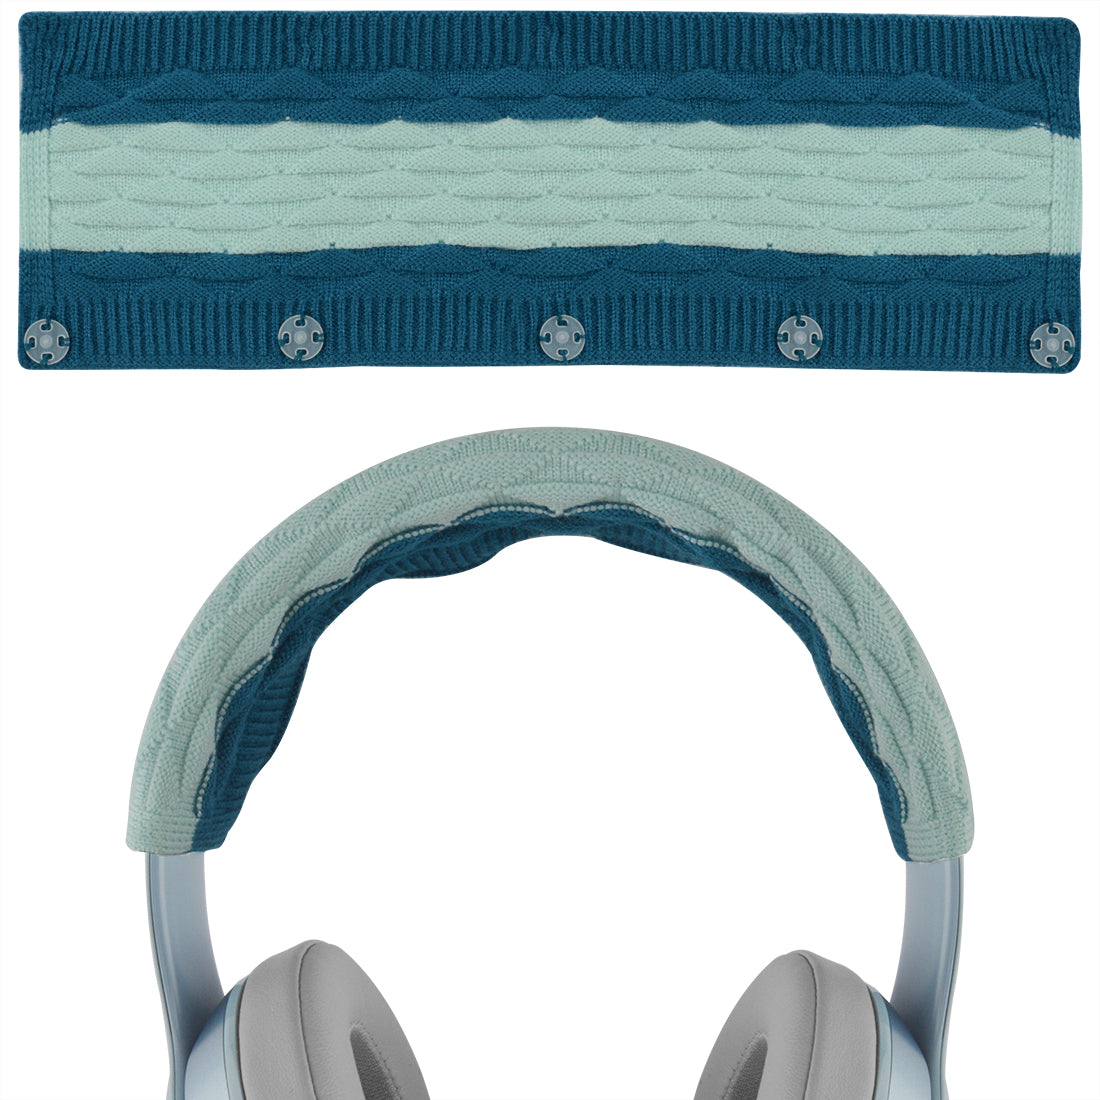 Geekria Knit Fabric Headband Cover Compatible with Bose QC35 II